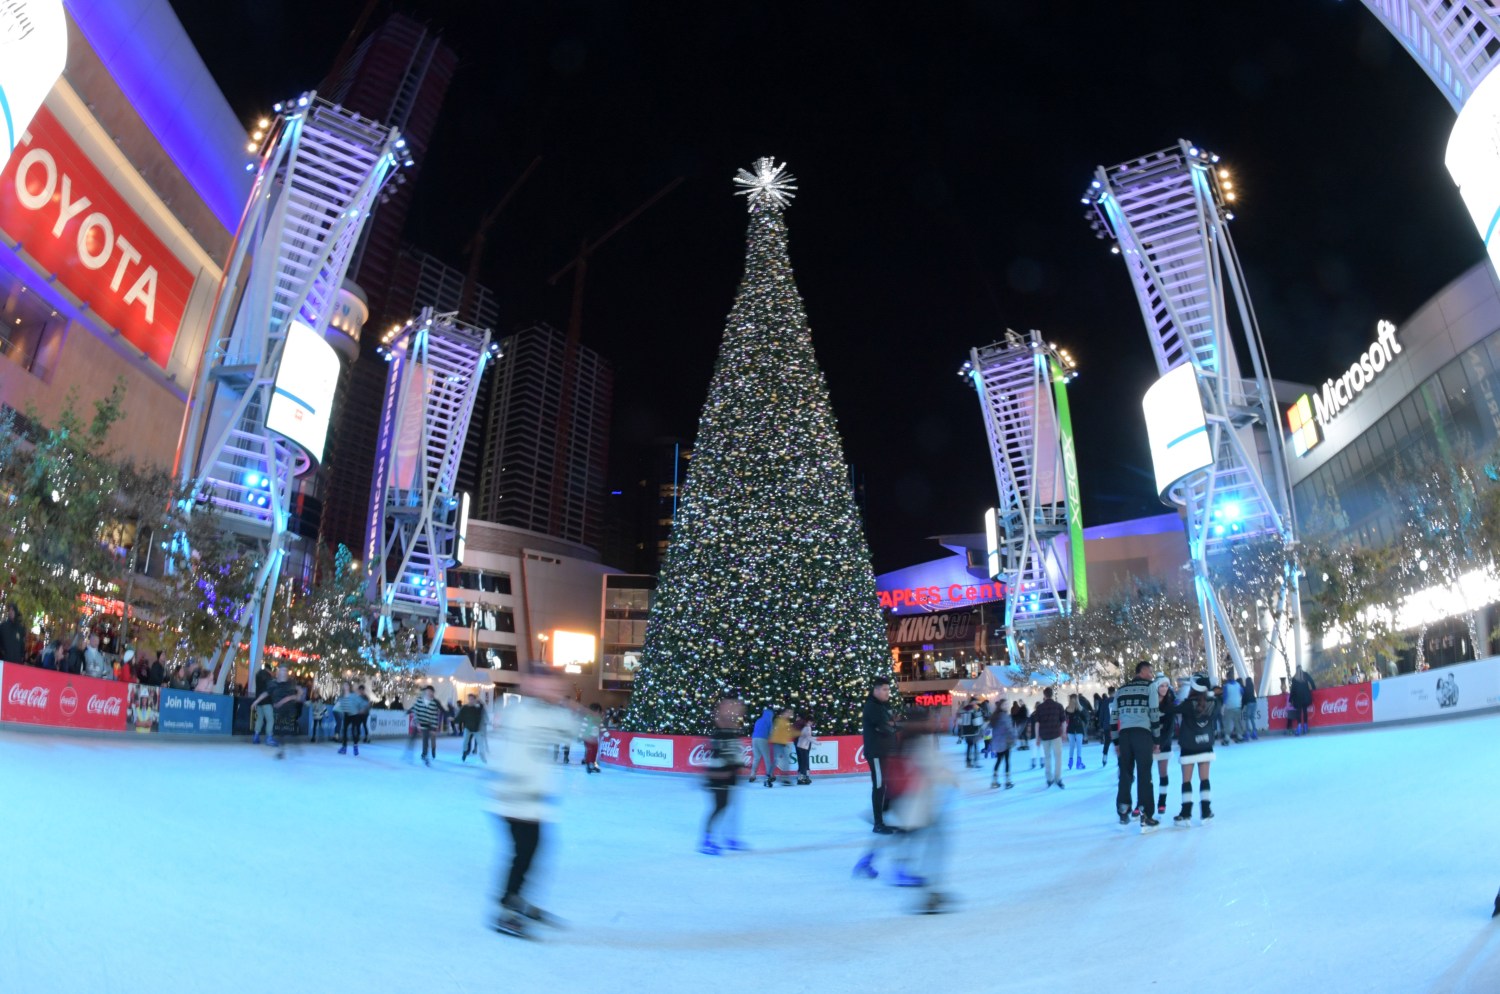 Dec 18, 2018; Los Angeles, CA, USA; People skate around a Christmas tree outside of the Staples Center before an NHL game between the Winnipeg Jets and the Los Angeles Kings. Mandatory Credit: Kirby Lee-USA TODAY Sports - 11869604